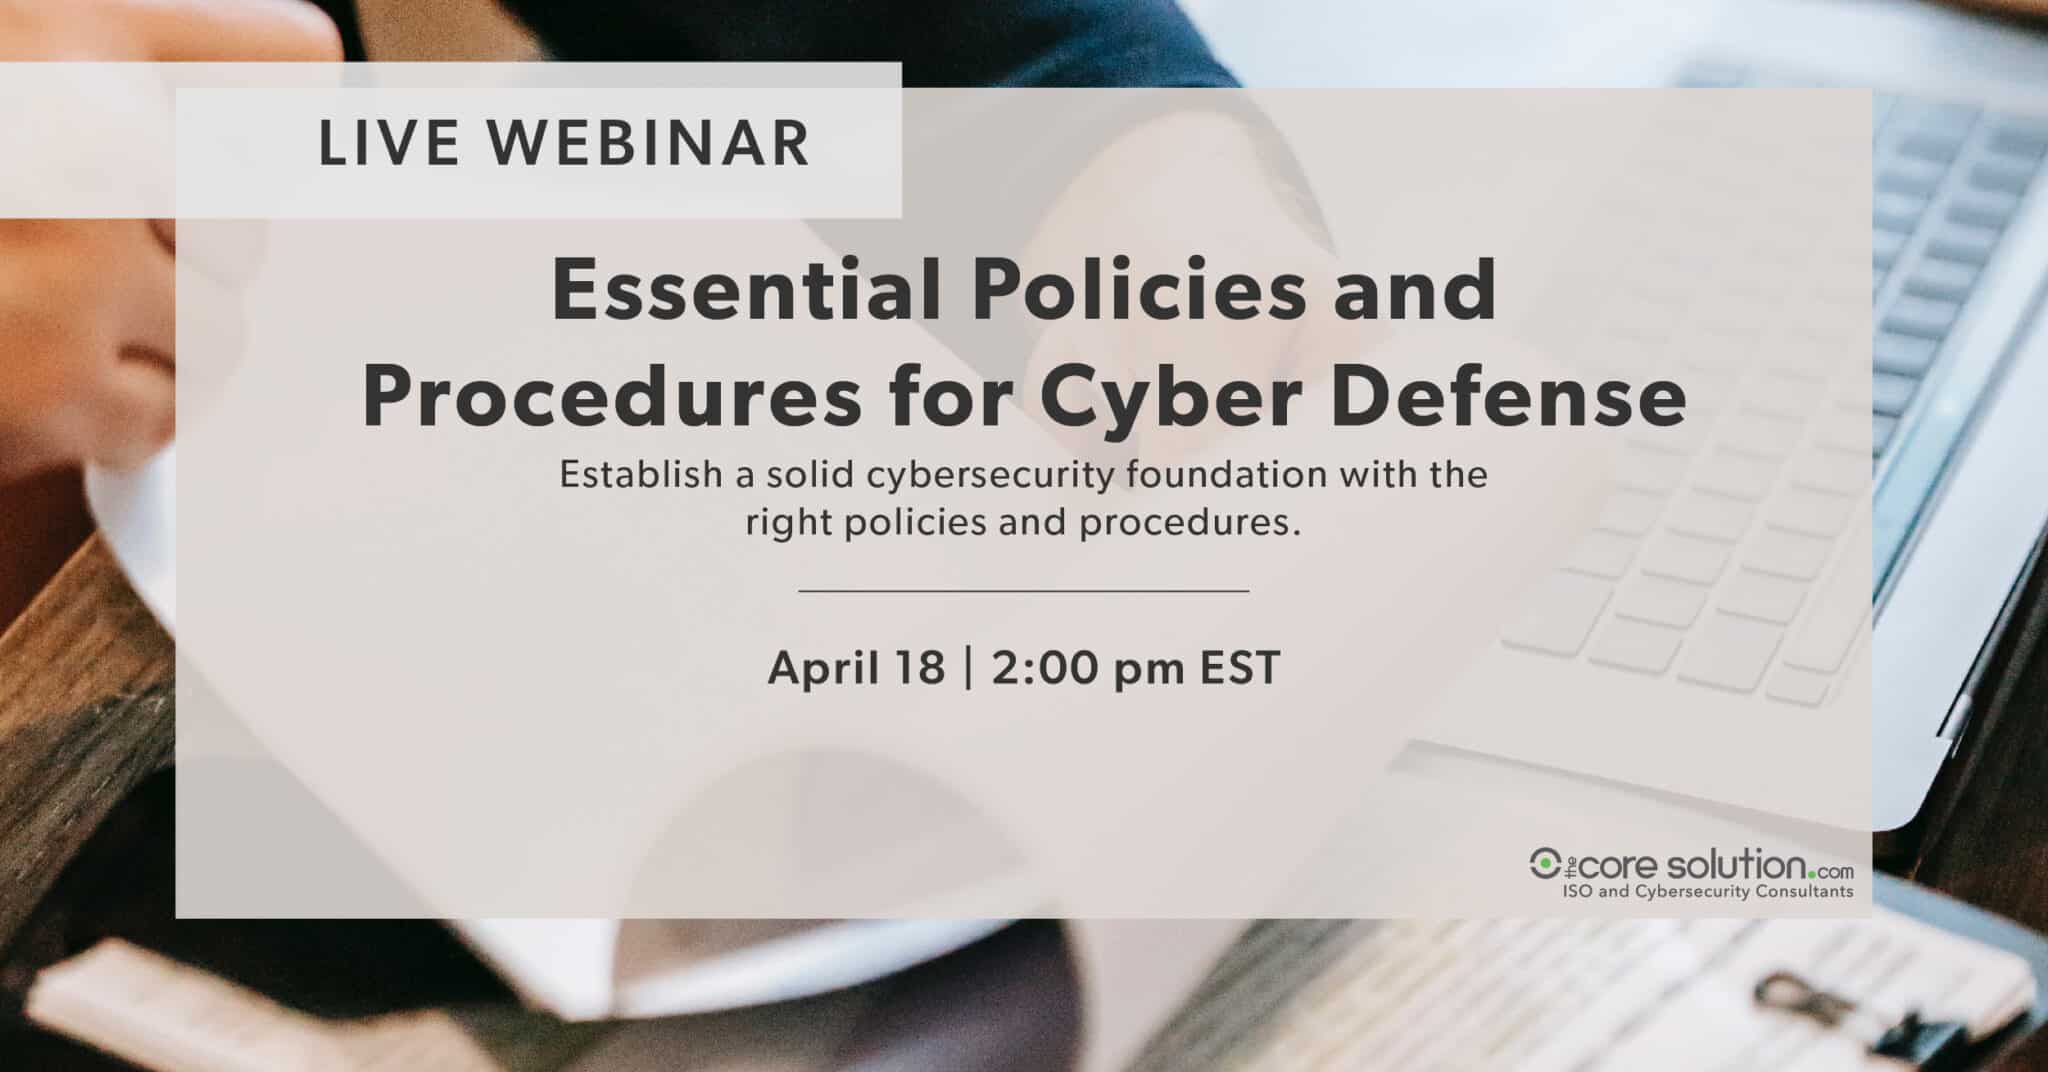 Essential Policies and Procedures for Cyber Defense